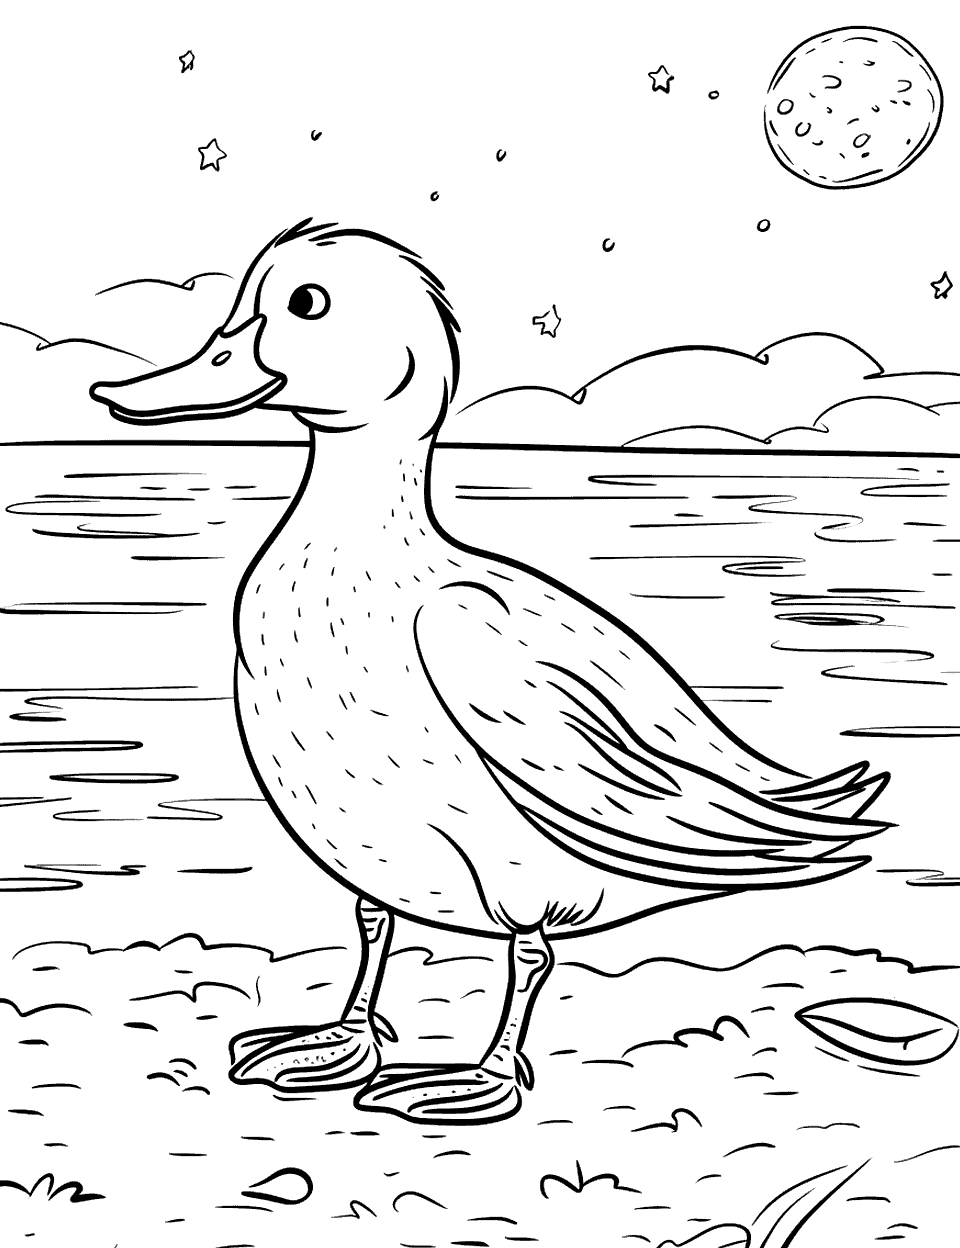 Duck on a Moonlit Night Coloring Page - A duck standing at the edge of a lake at night.